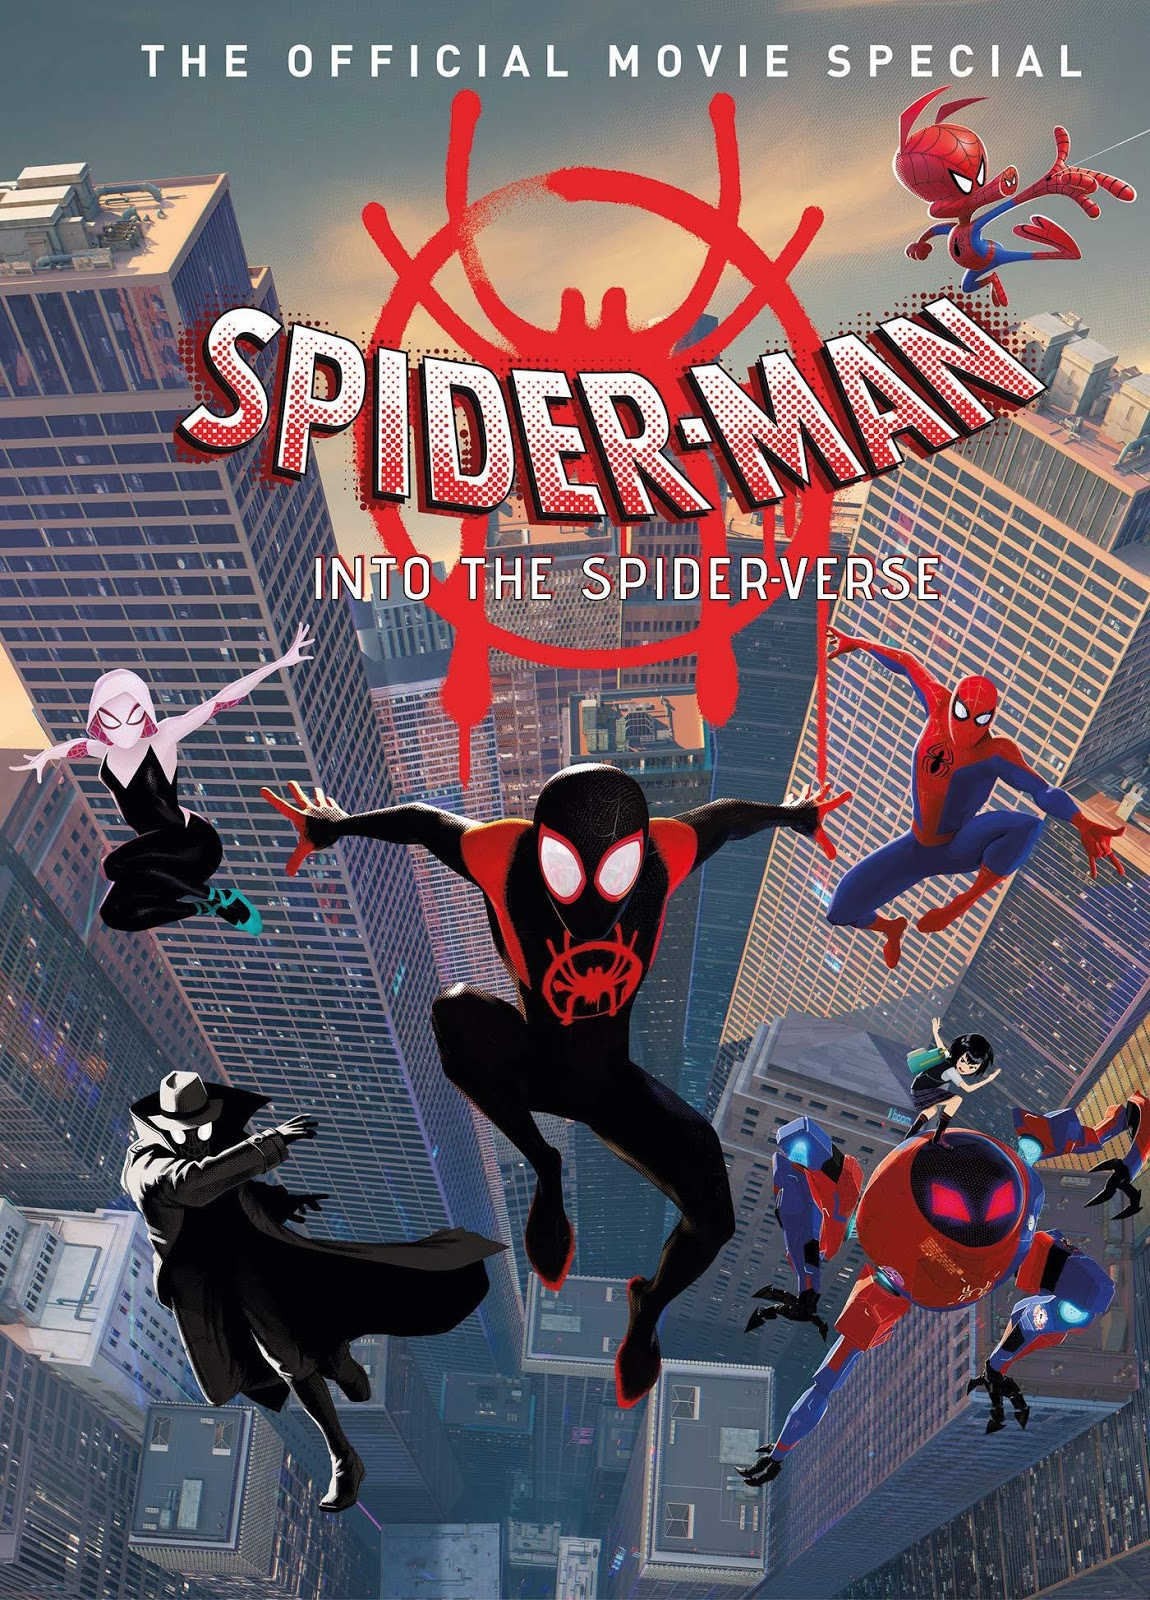 Review - "Spider-Man: Into the Spider-Verse - The Official Movie